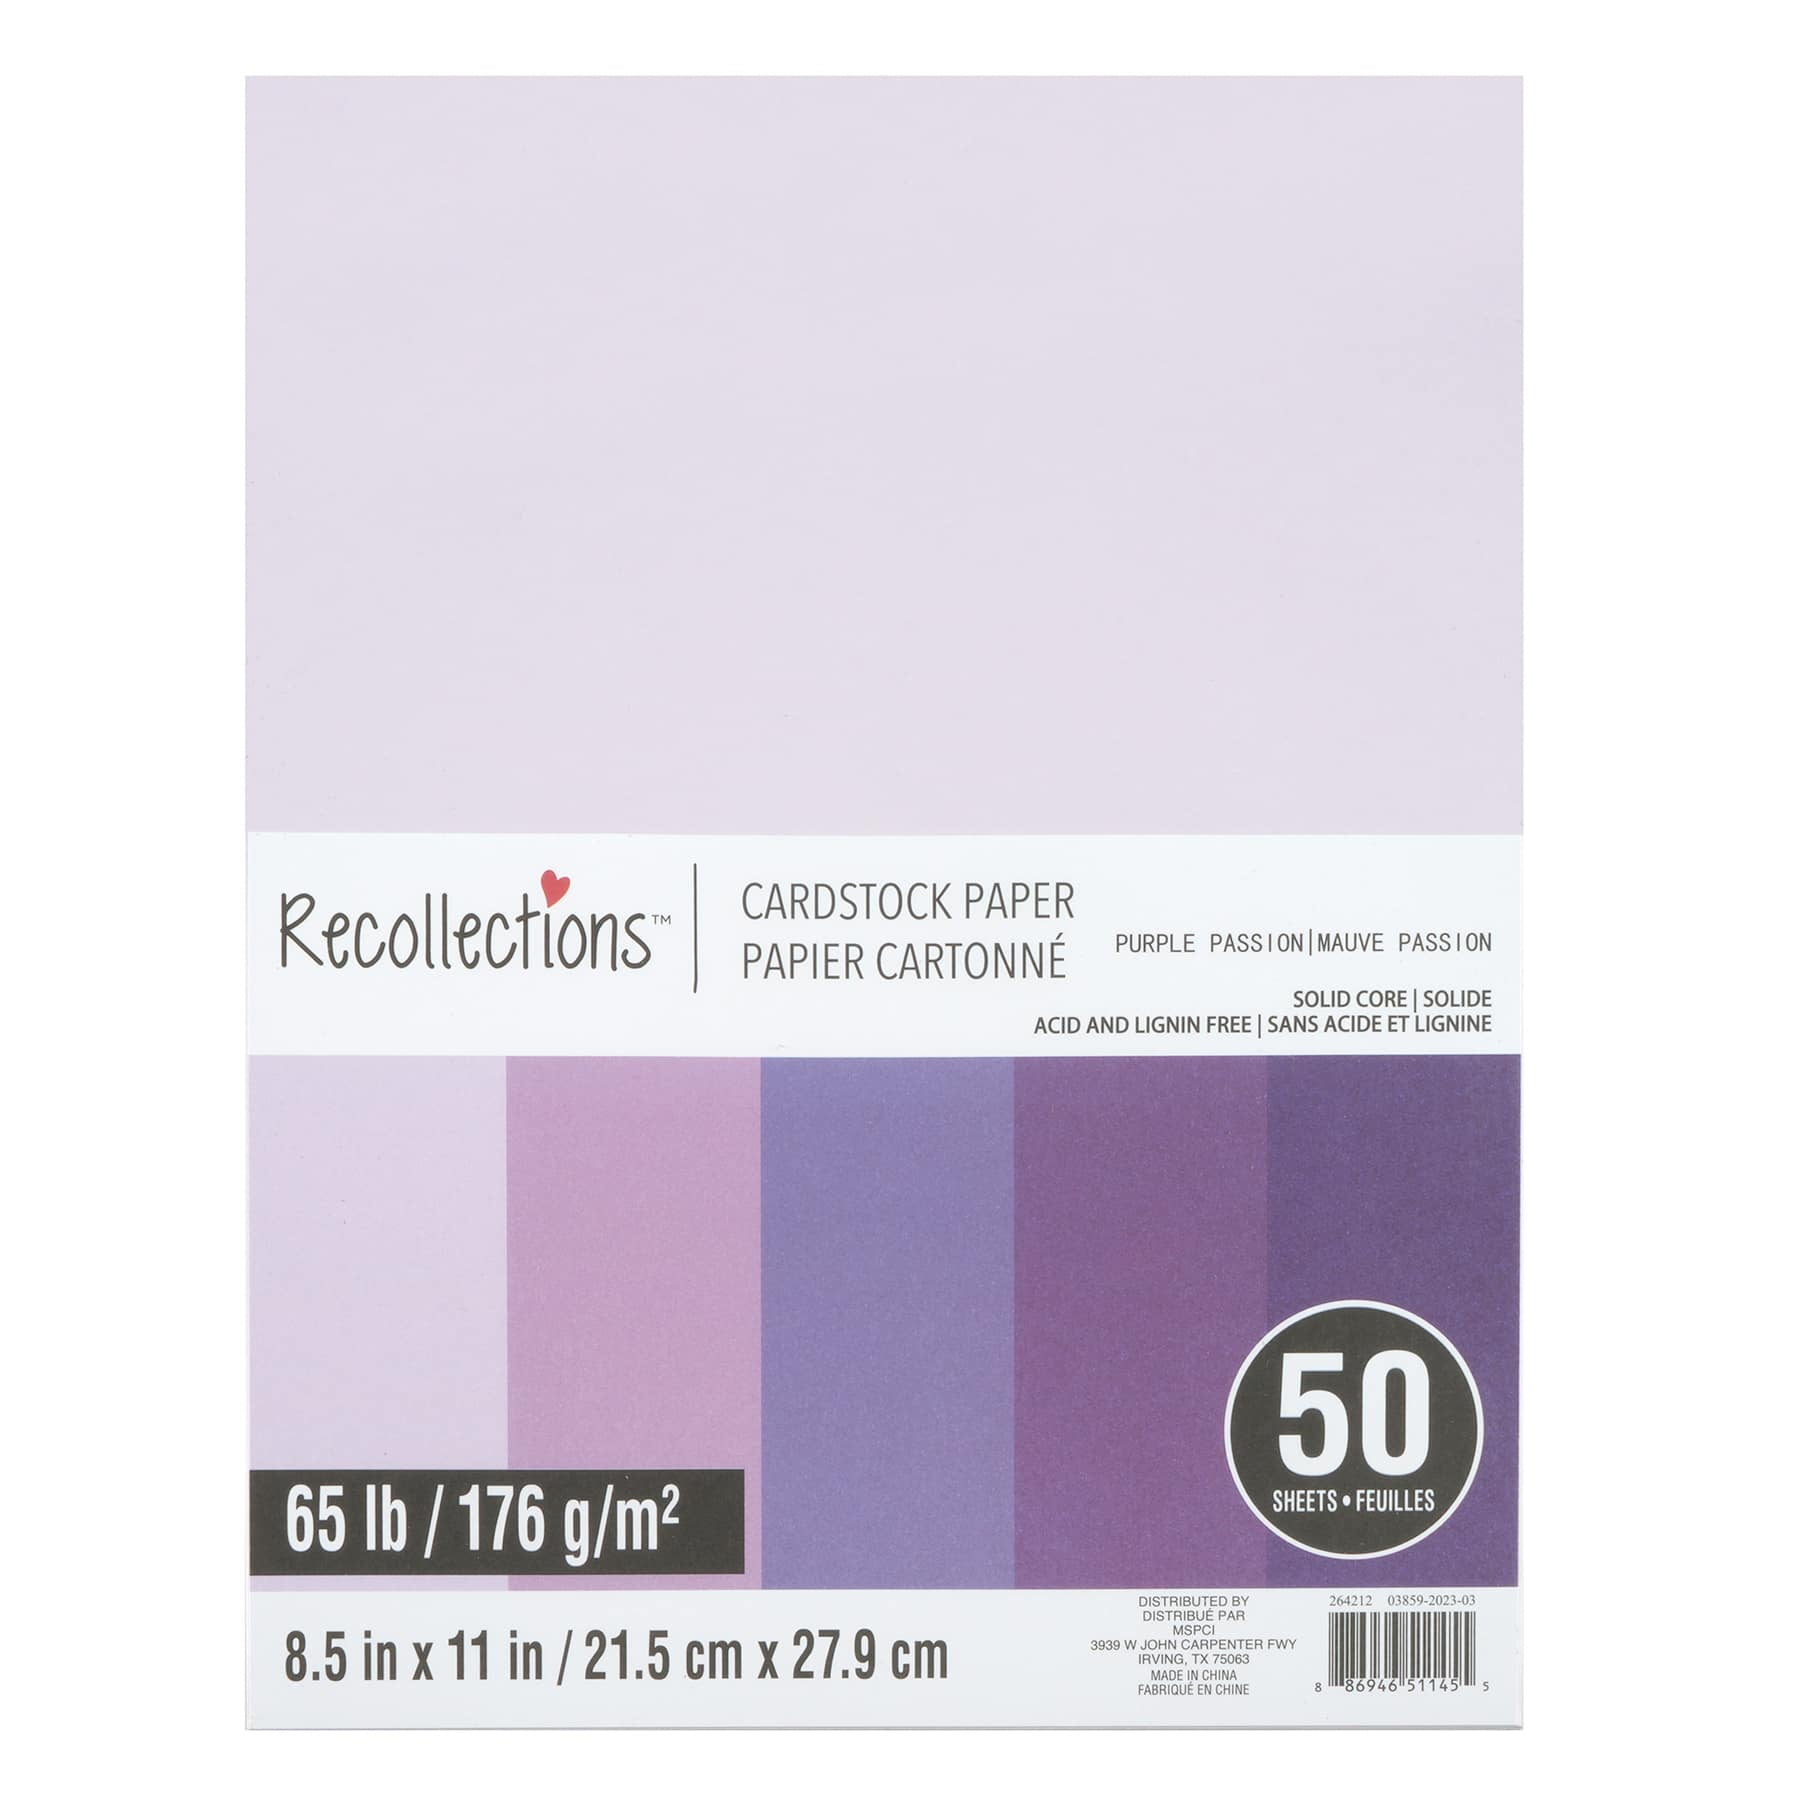 Purple Passion 8.5 x 11 Cardstock Paper by Recollections®, 50 Sheets 